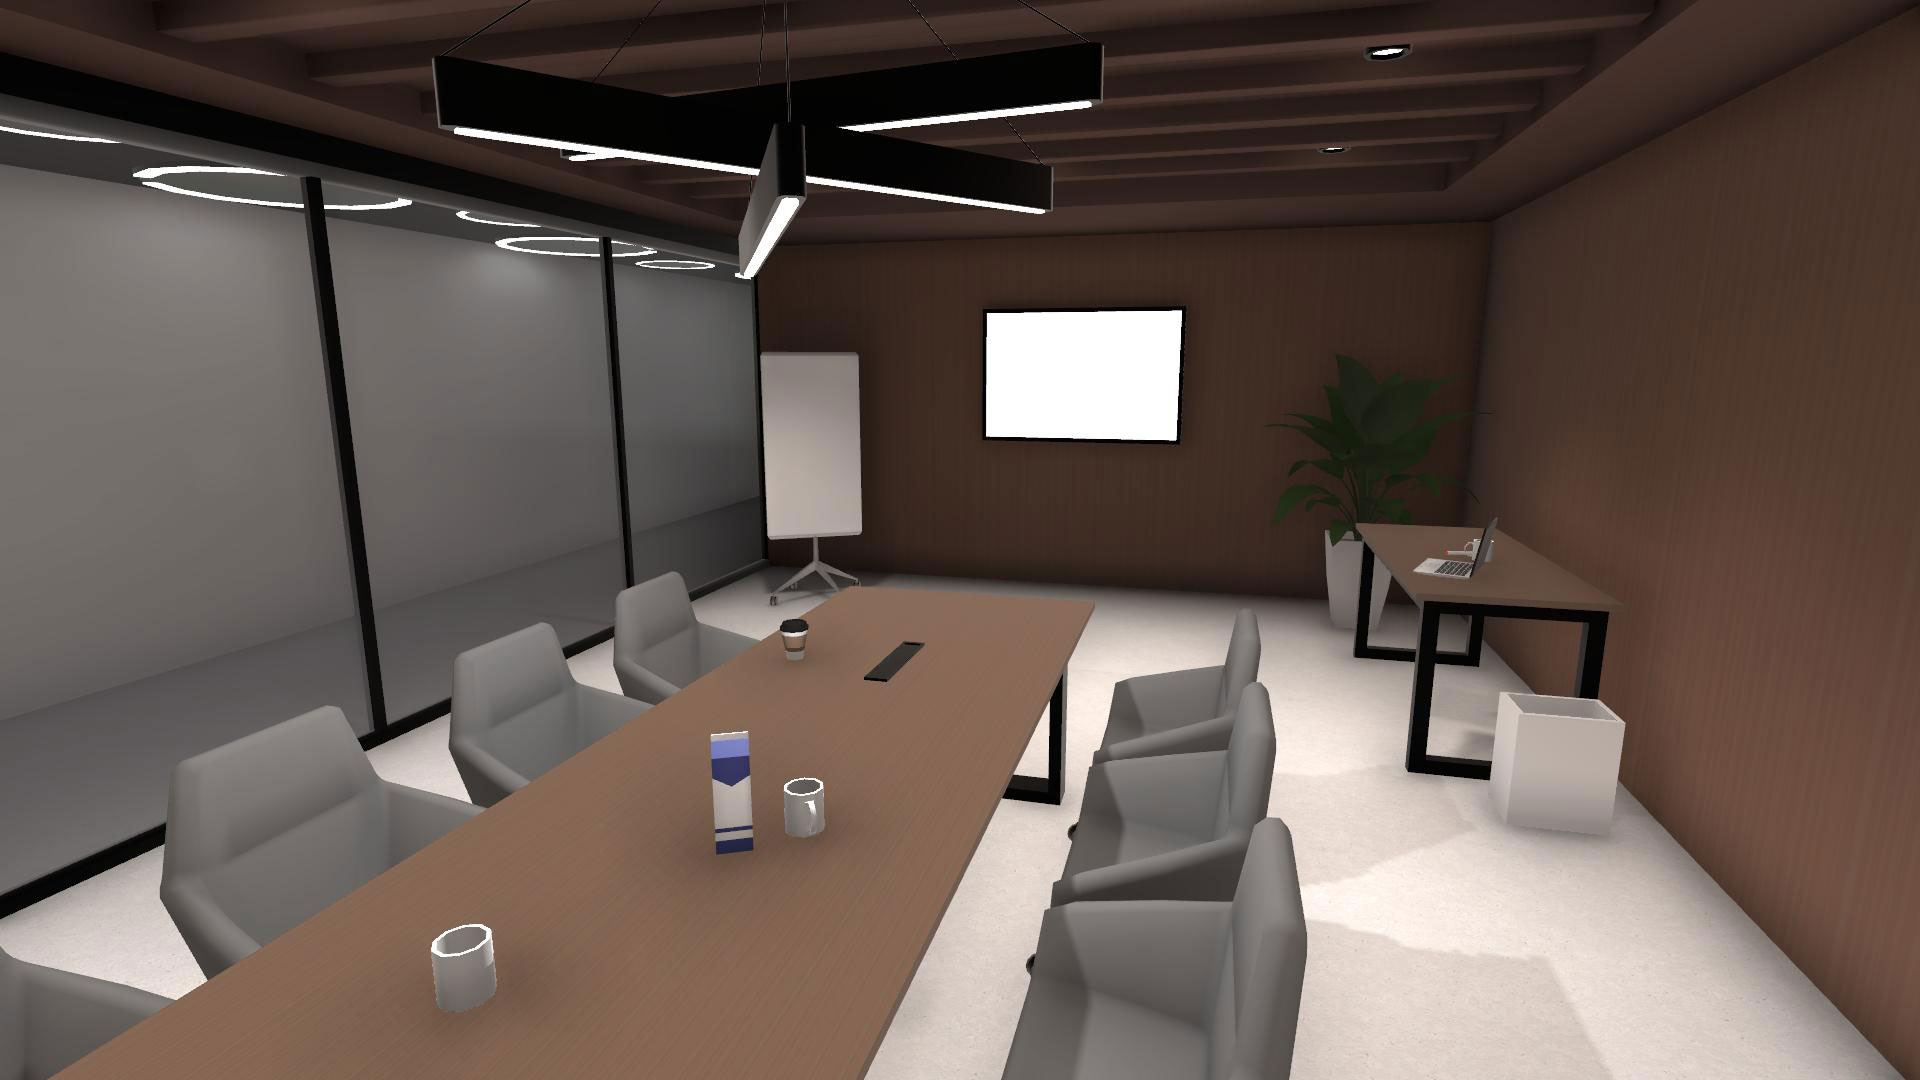 A 3D model of a small meeting room, made for VR.